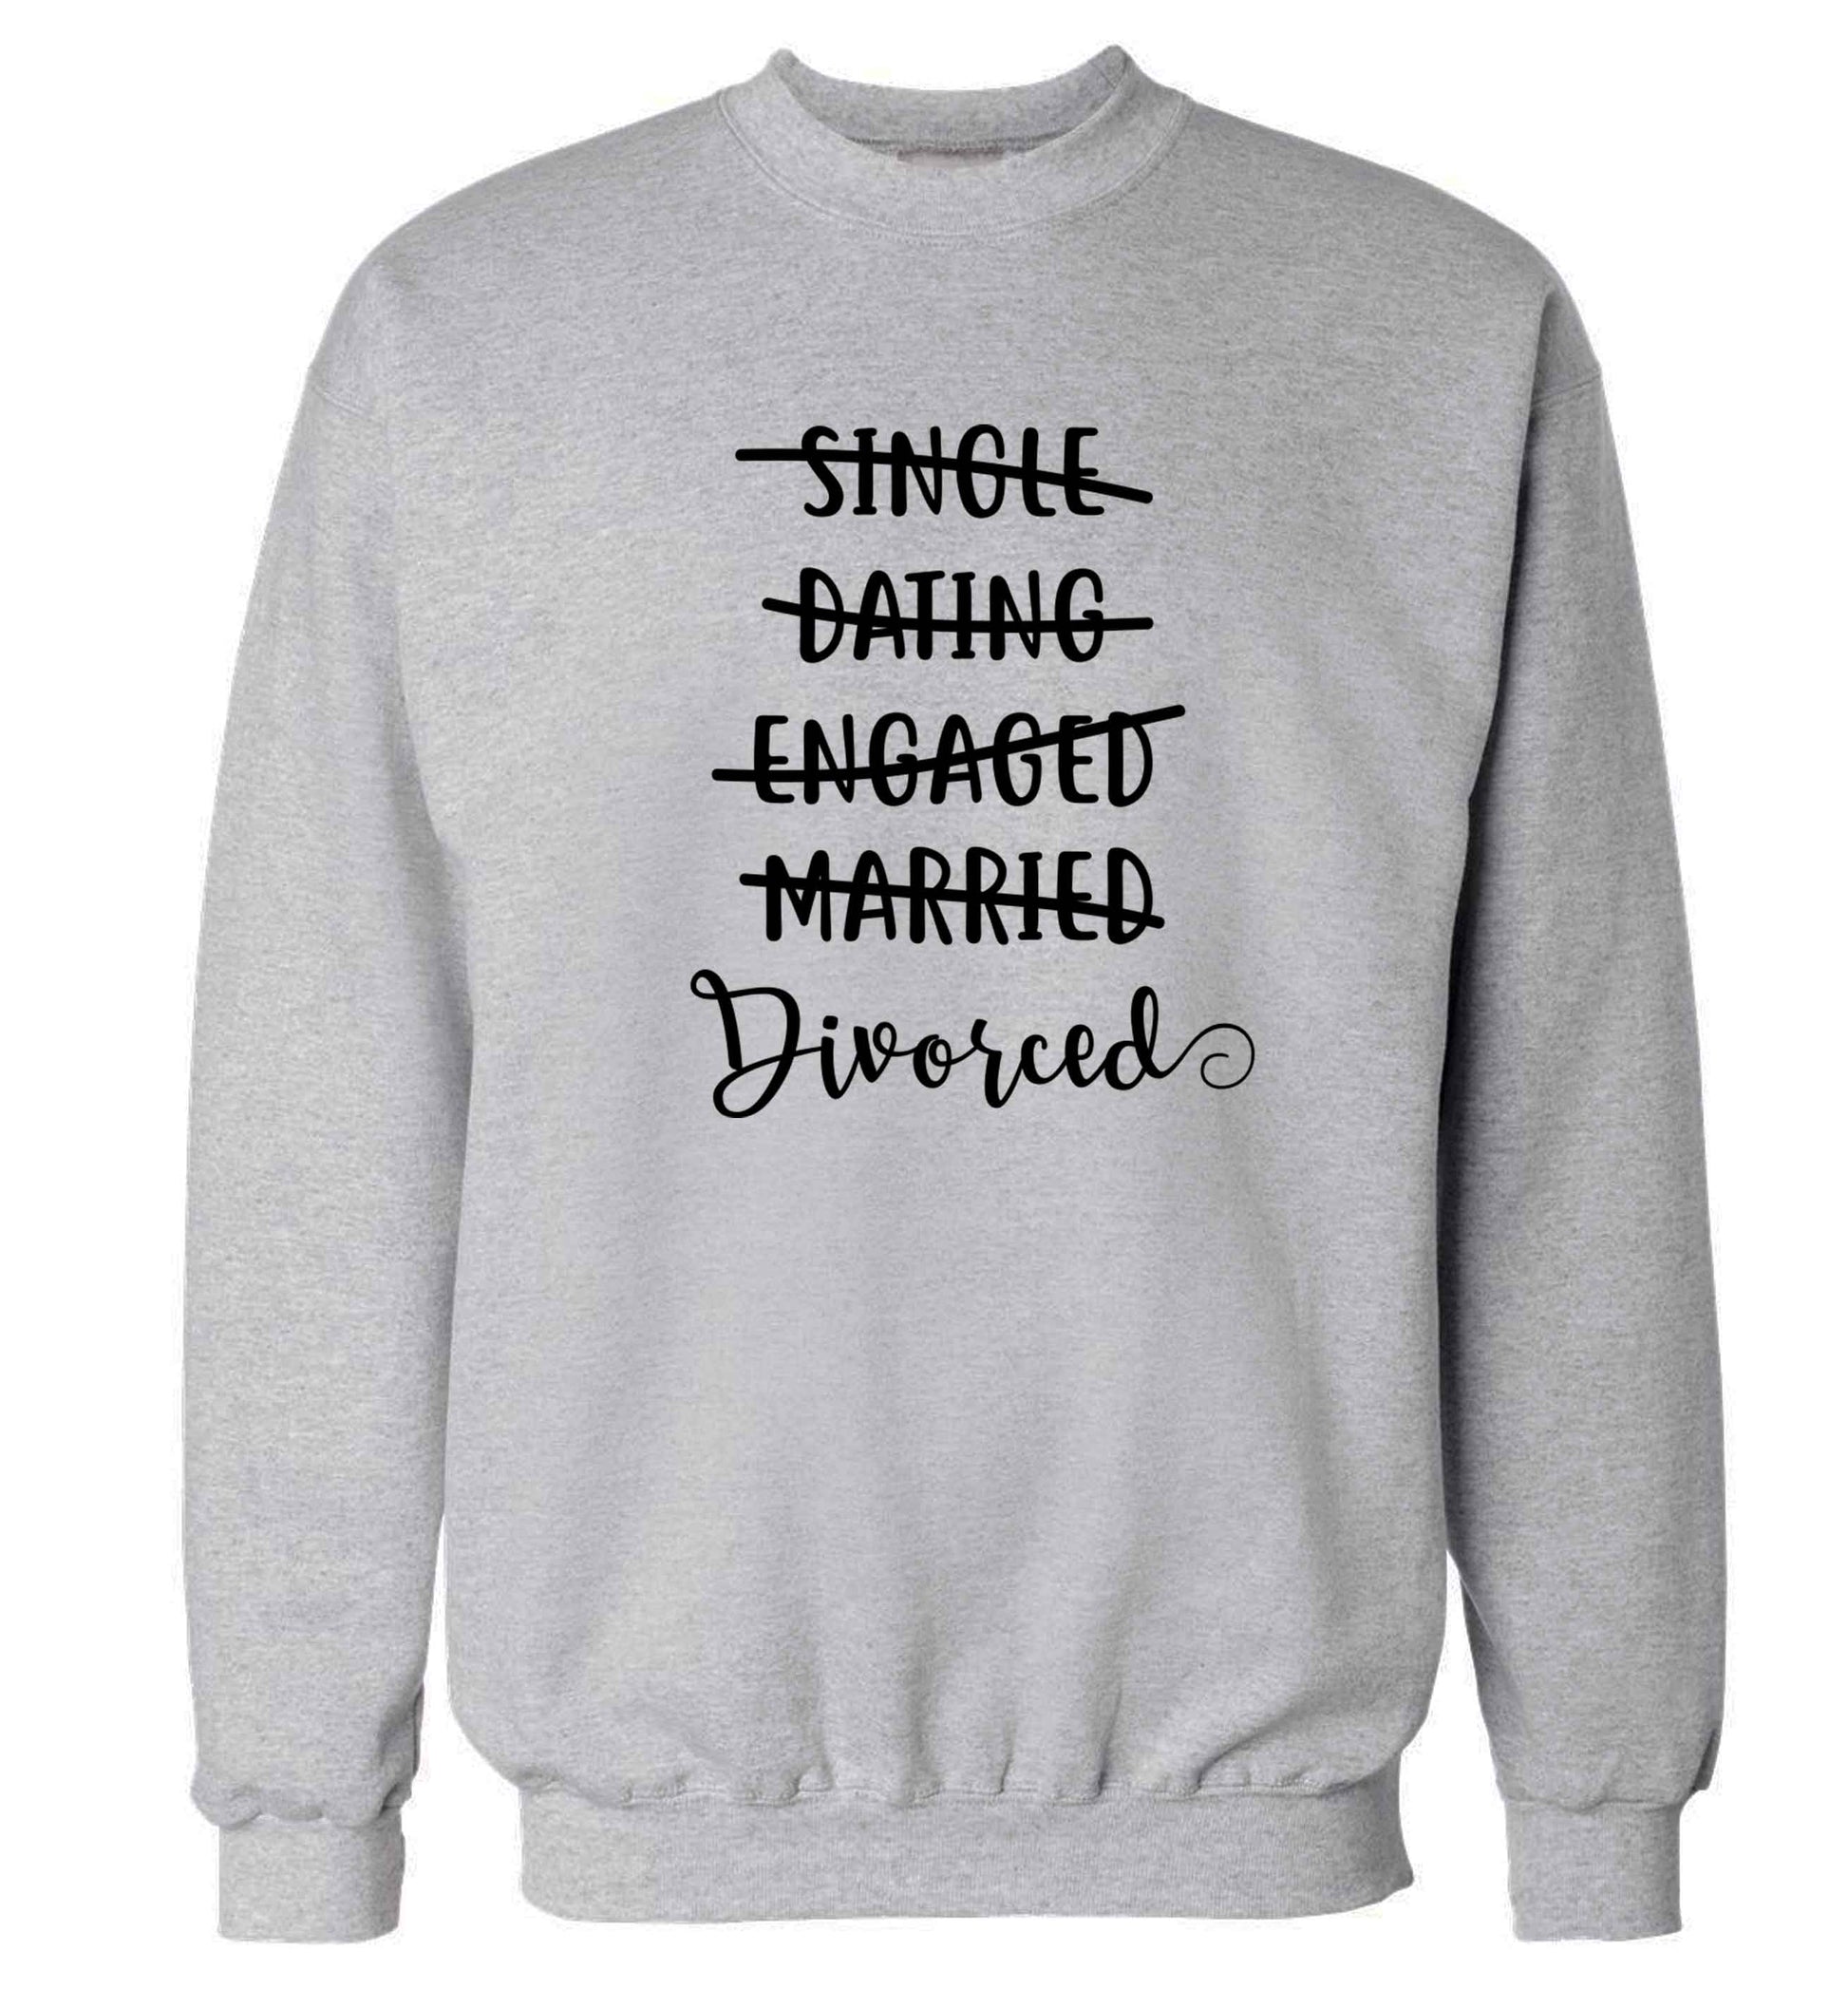 Single, dating, engaged, divorced Adult's unisex grey Sweater 2XL